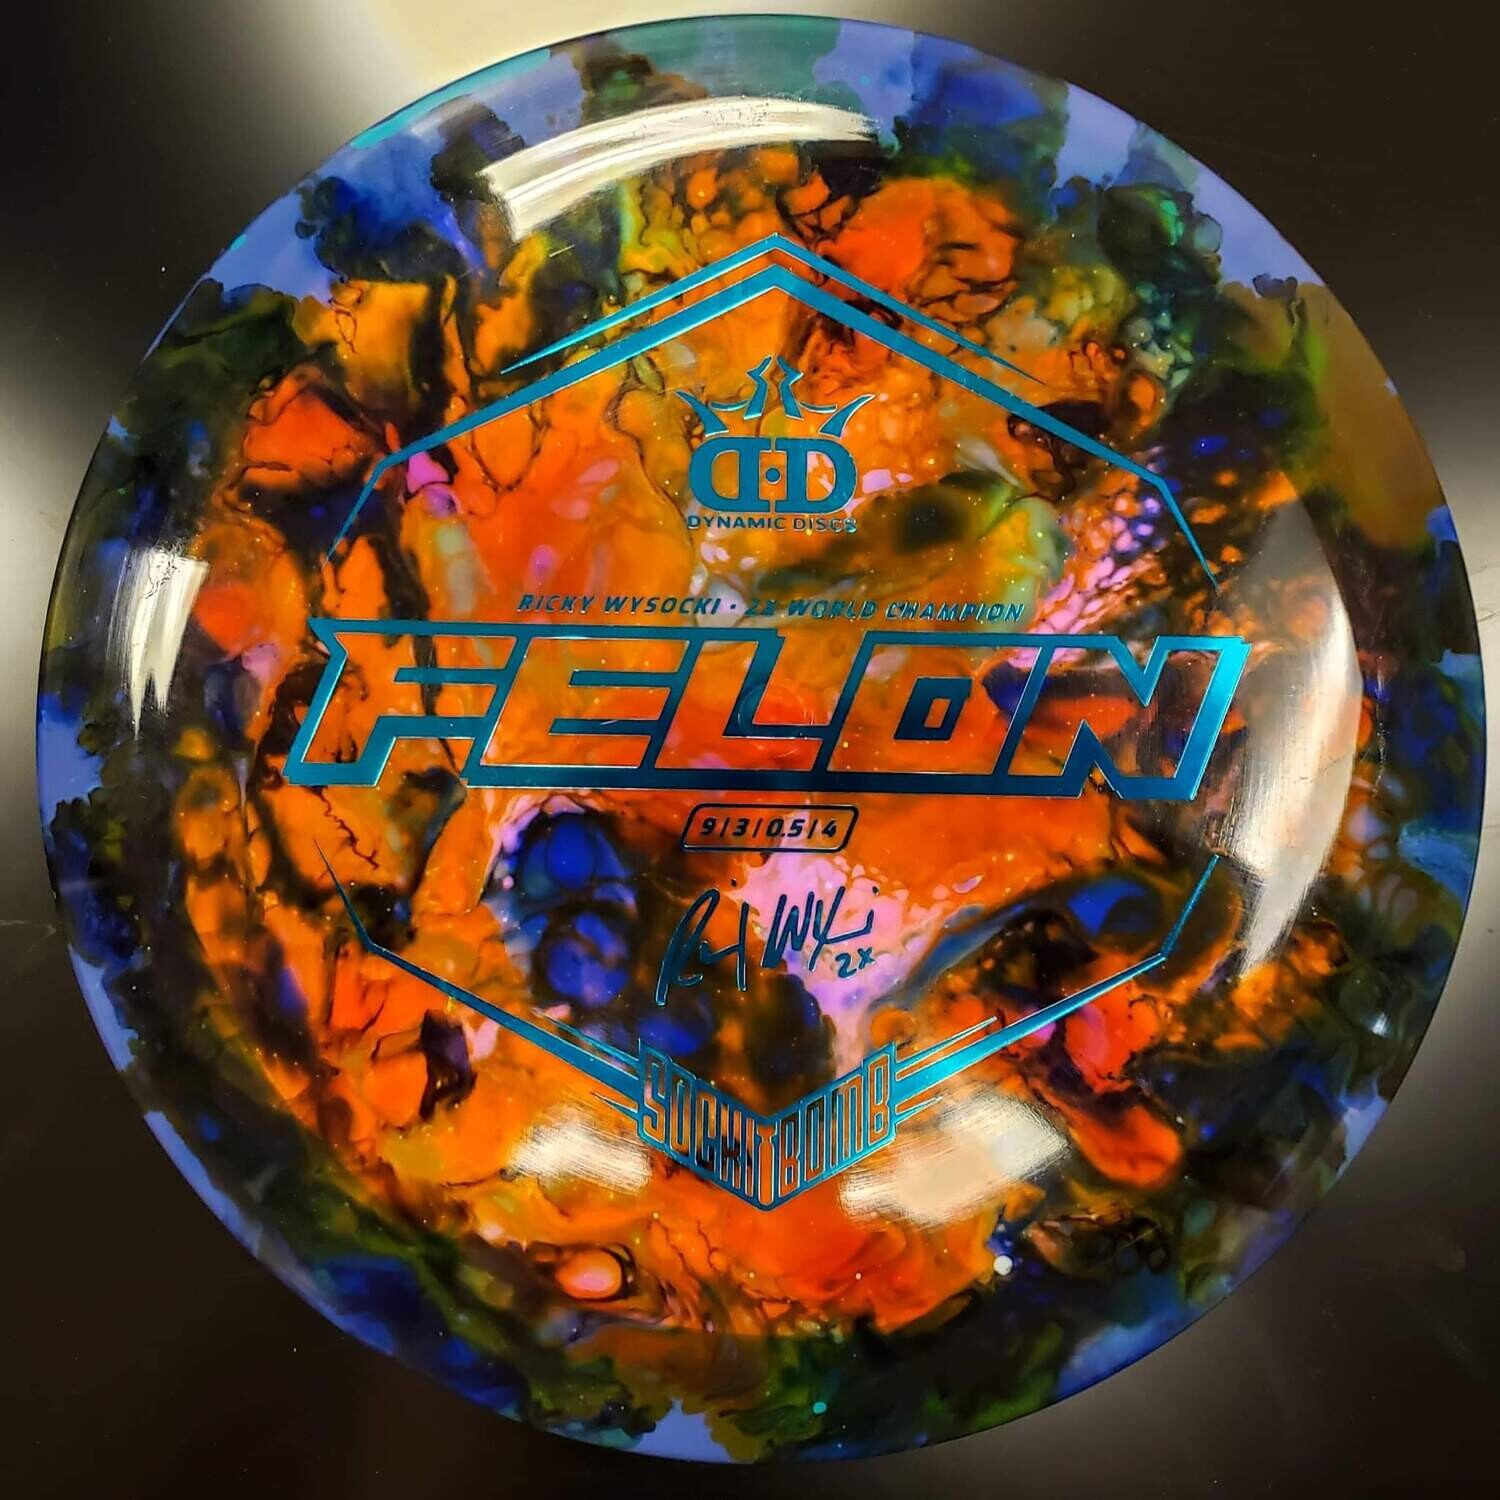 Sockibomb Orbit Felon 173g Shipped! Brought to you by Ace's Fly Dyes